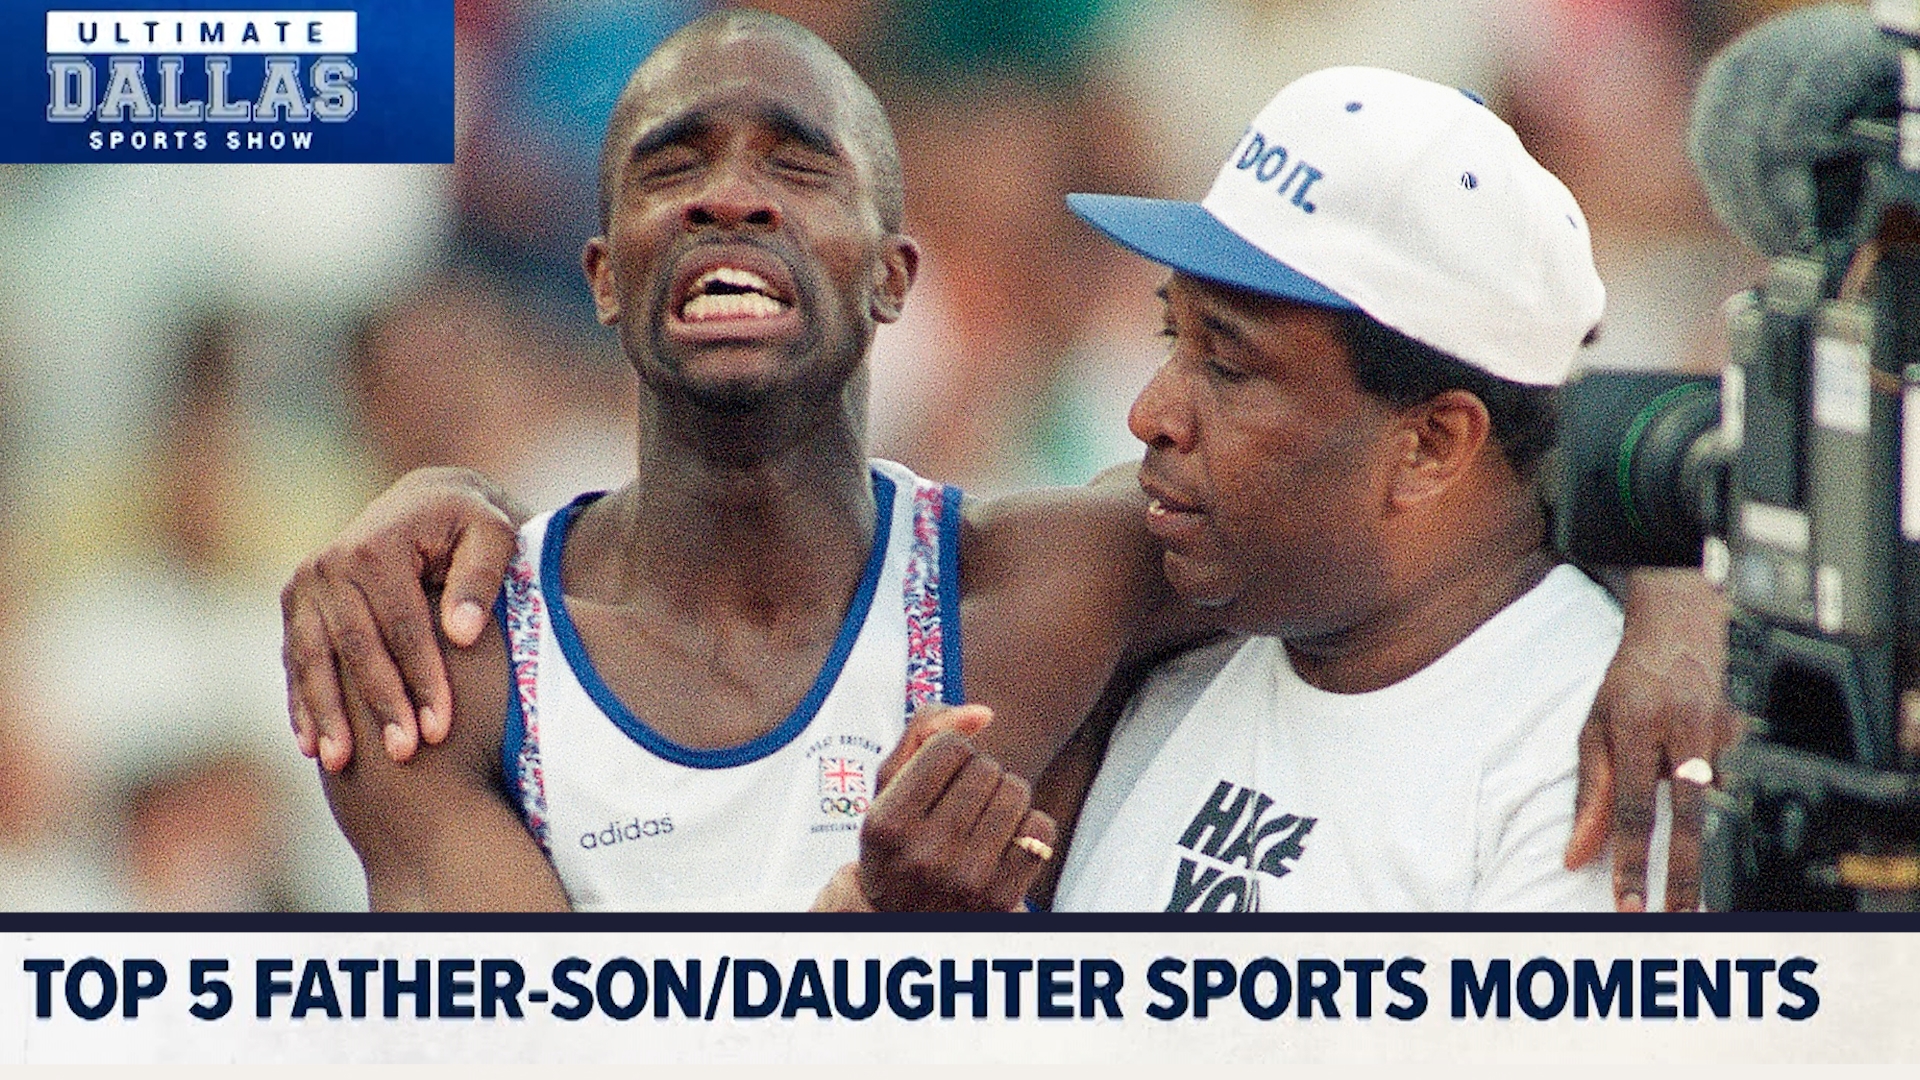 With Father's Day upon us, the Ultimate Dallas Sports Show takes a closer look at the Top 5 Fatherhood moments in sports!